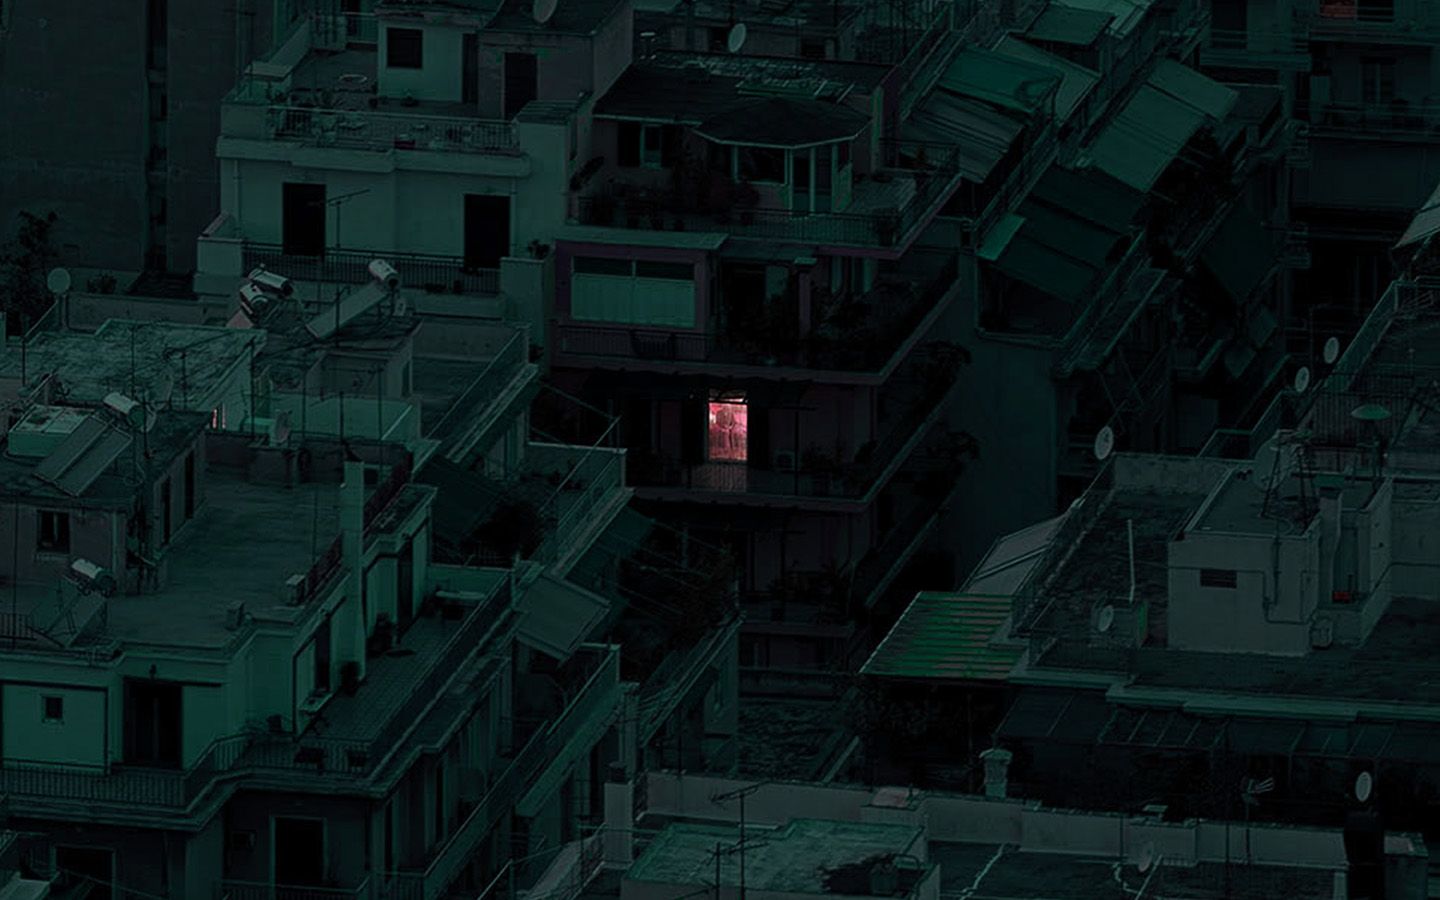 A pink door is lit up in the middle of a dark city. - Dark green